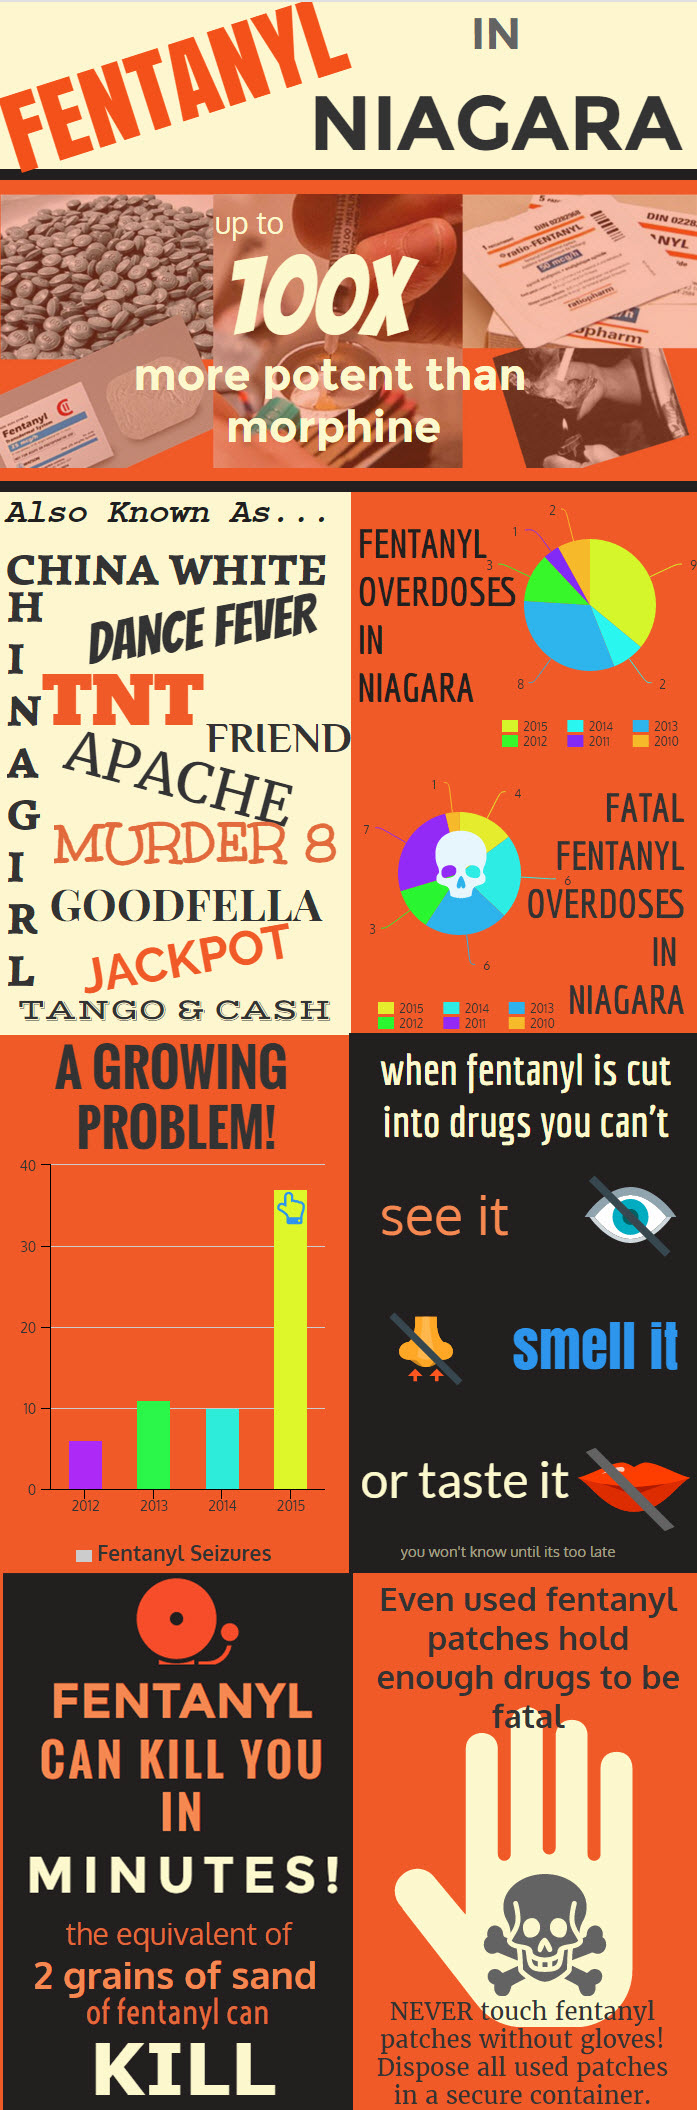 Fentanyl Public Safety Infographic